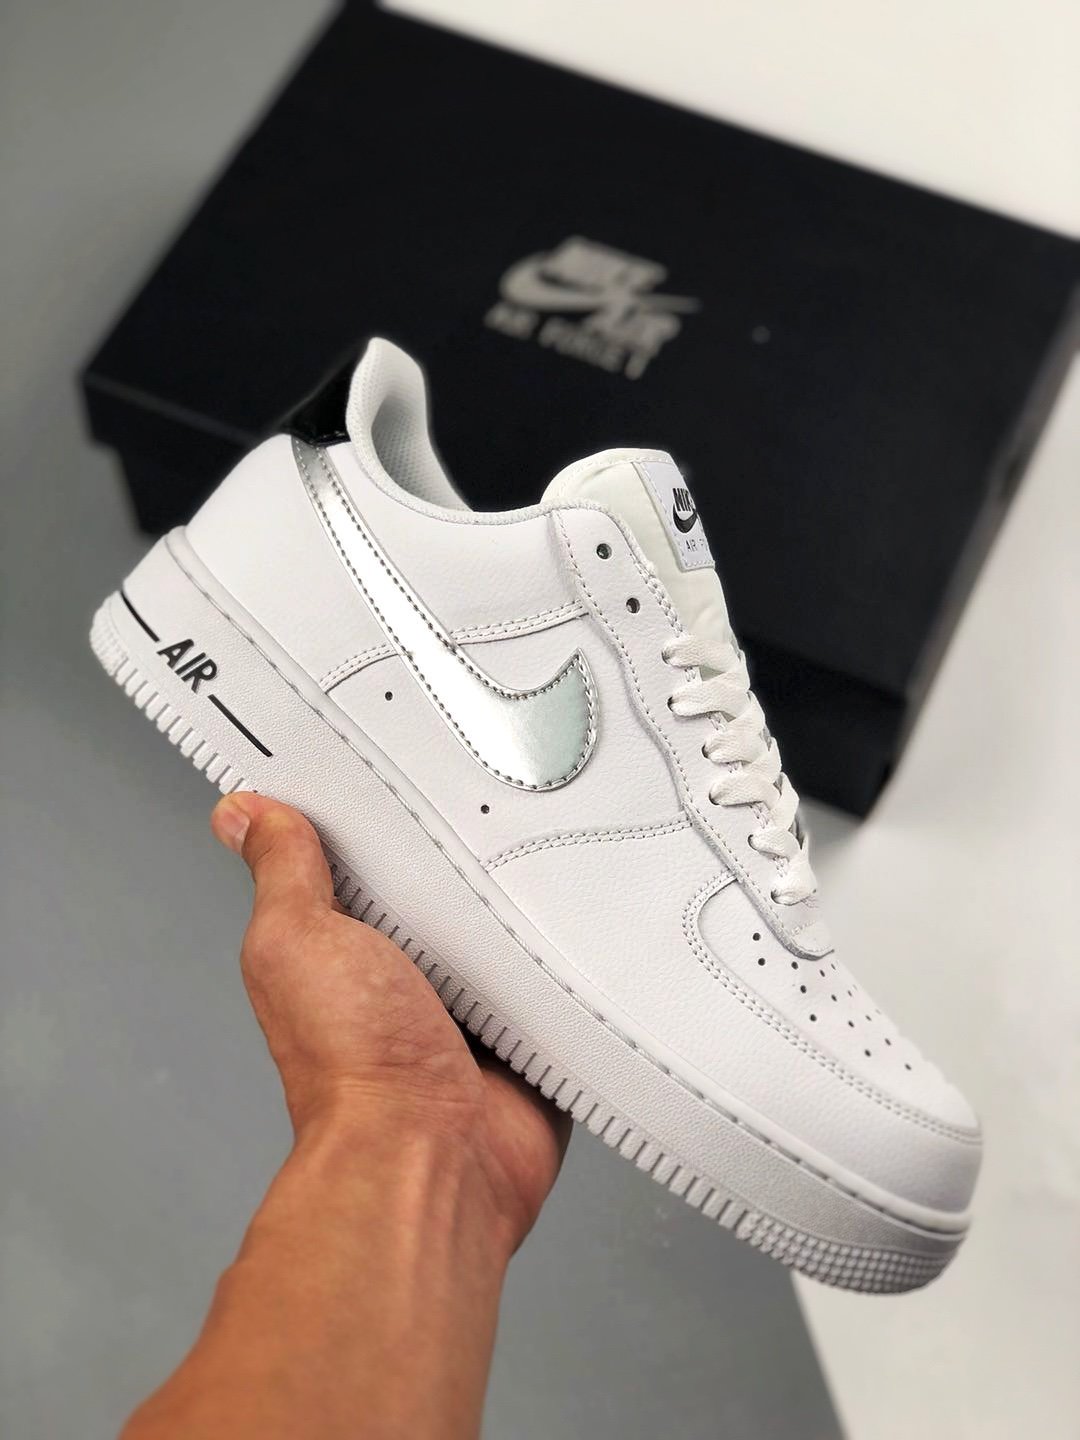 Nike Air AF Force 1 Low White Black Metallic Silver Shoes